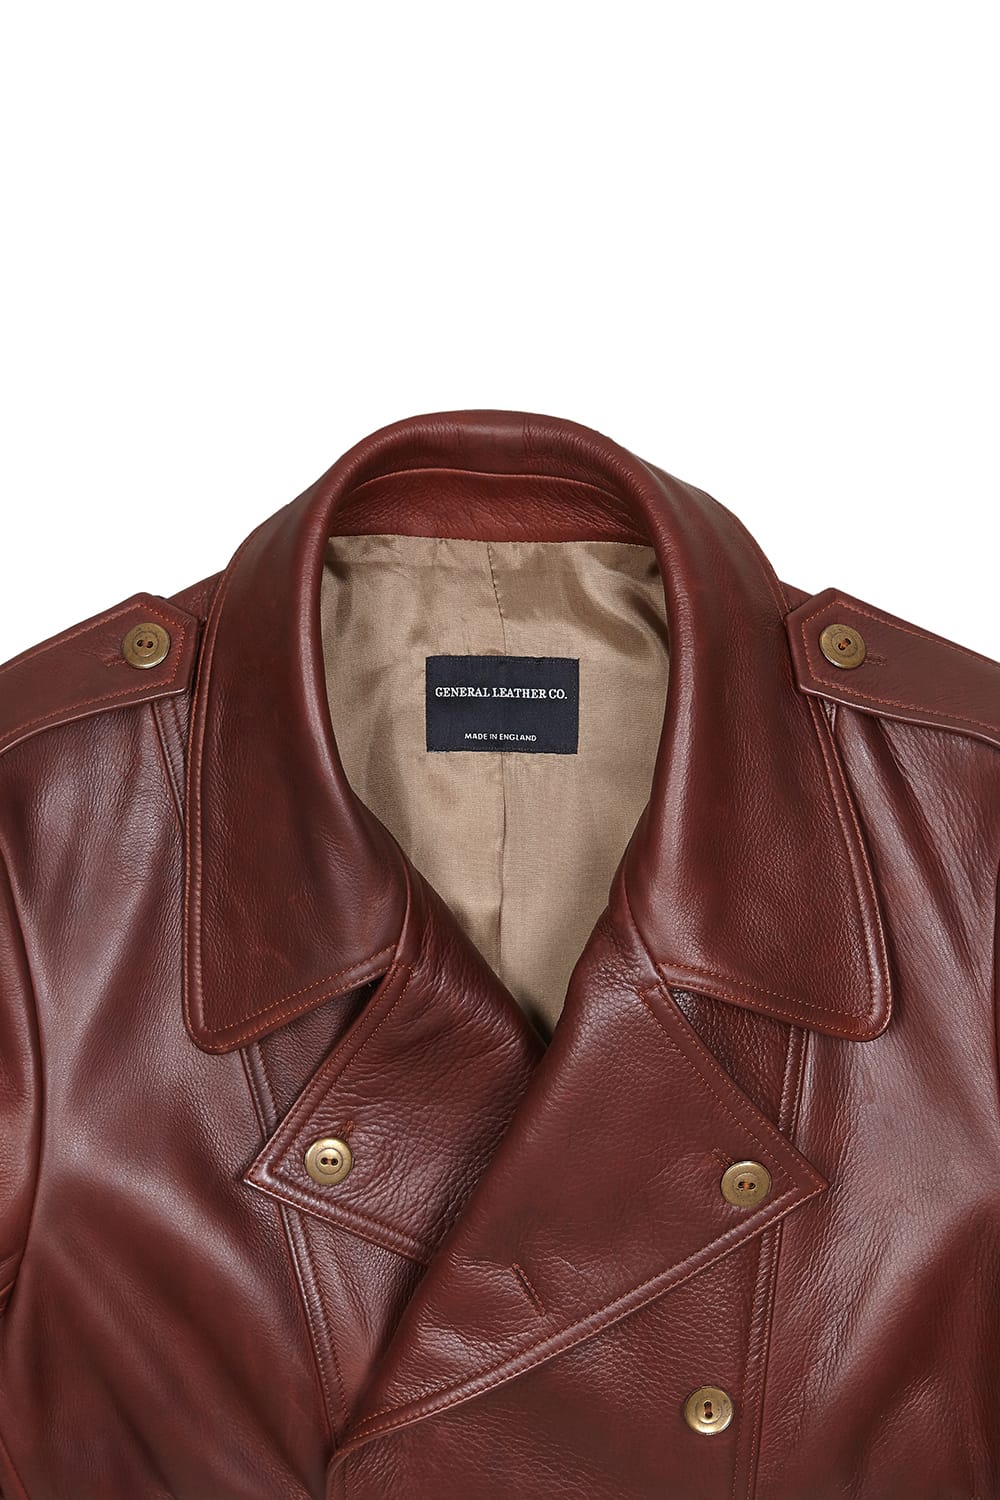 The East-wood Leather Vest